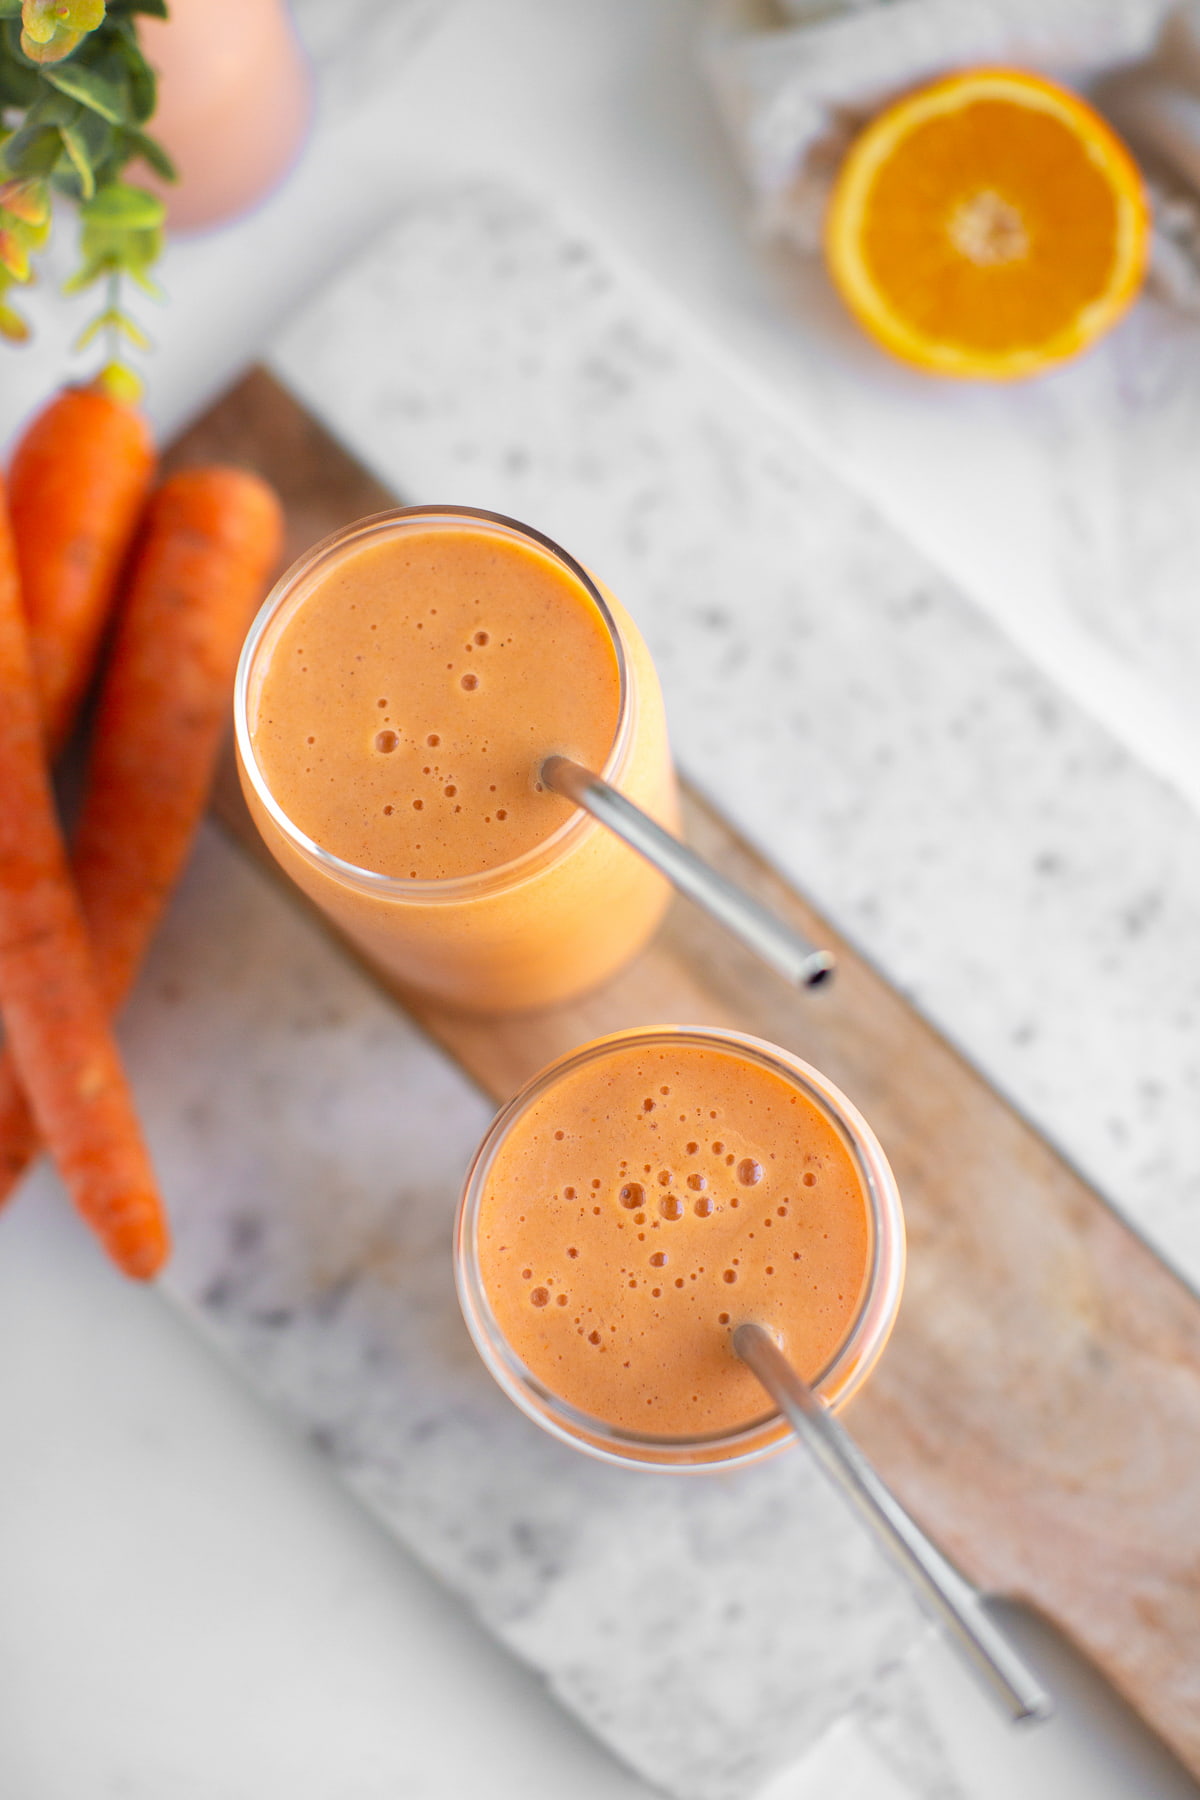 Two carrot smoothies in glass cups with metal straws next to a few carrots.